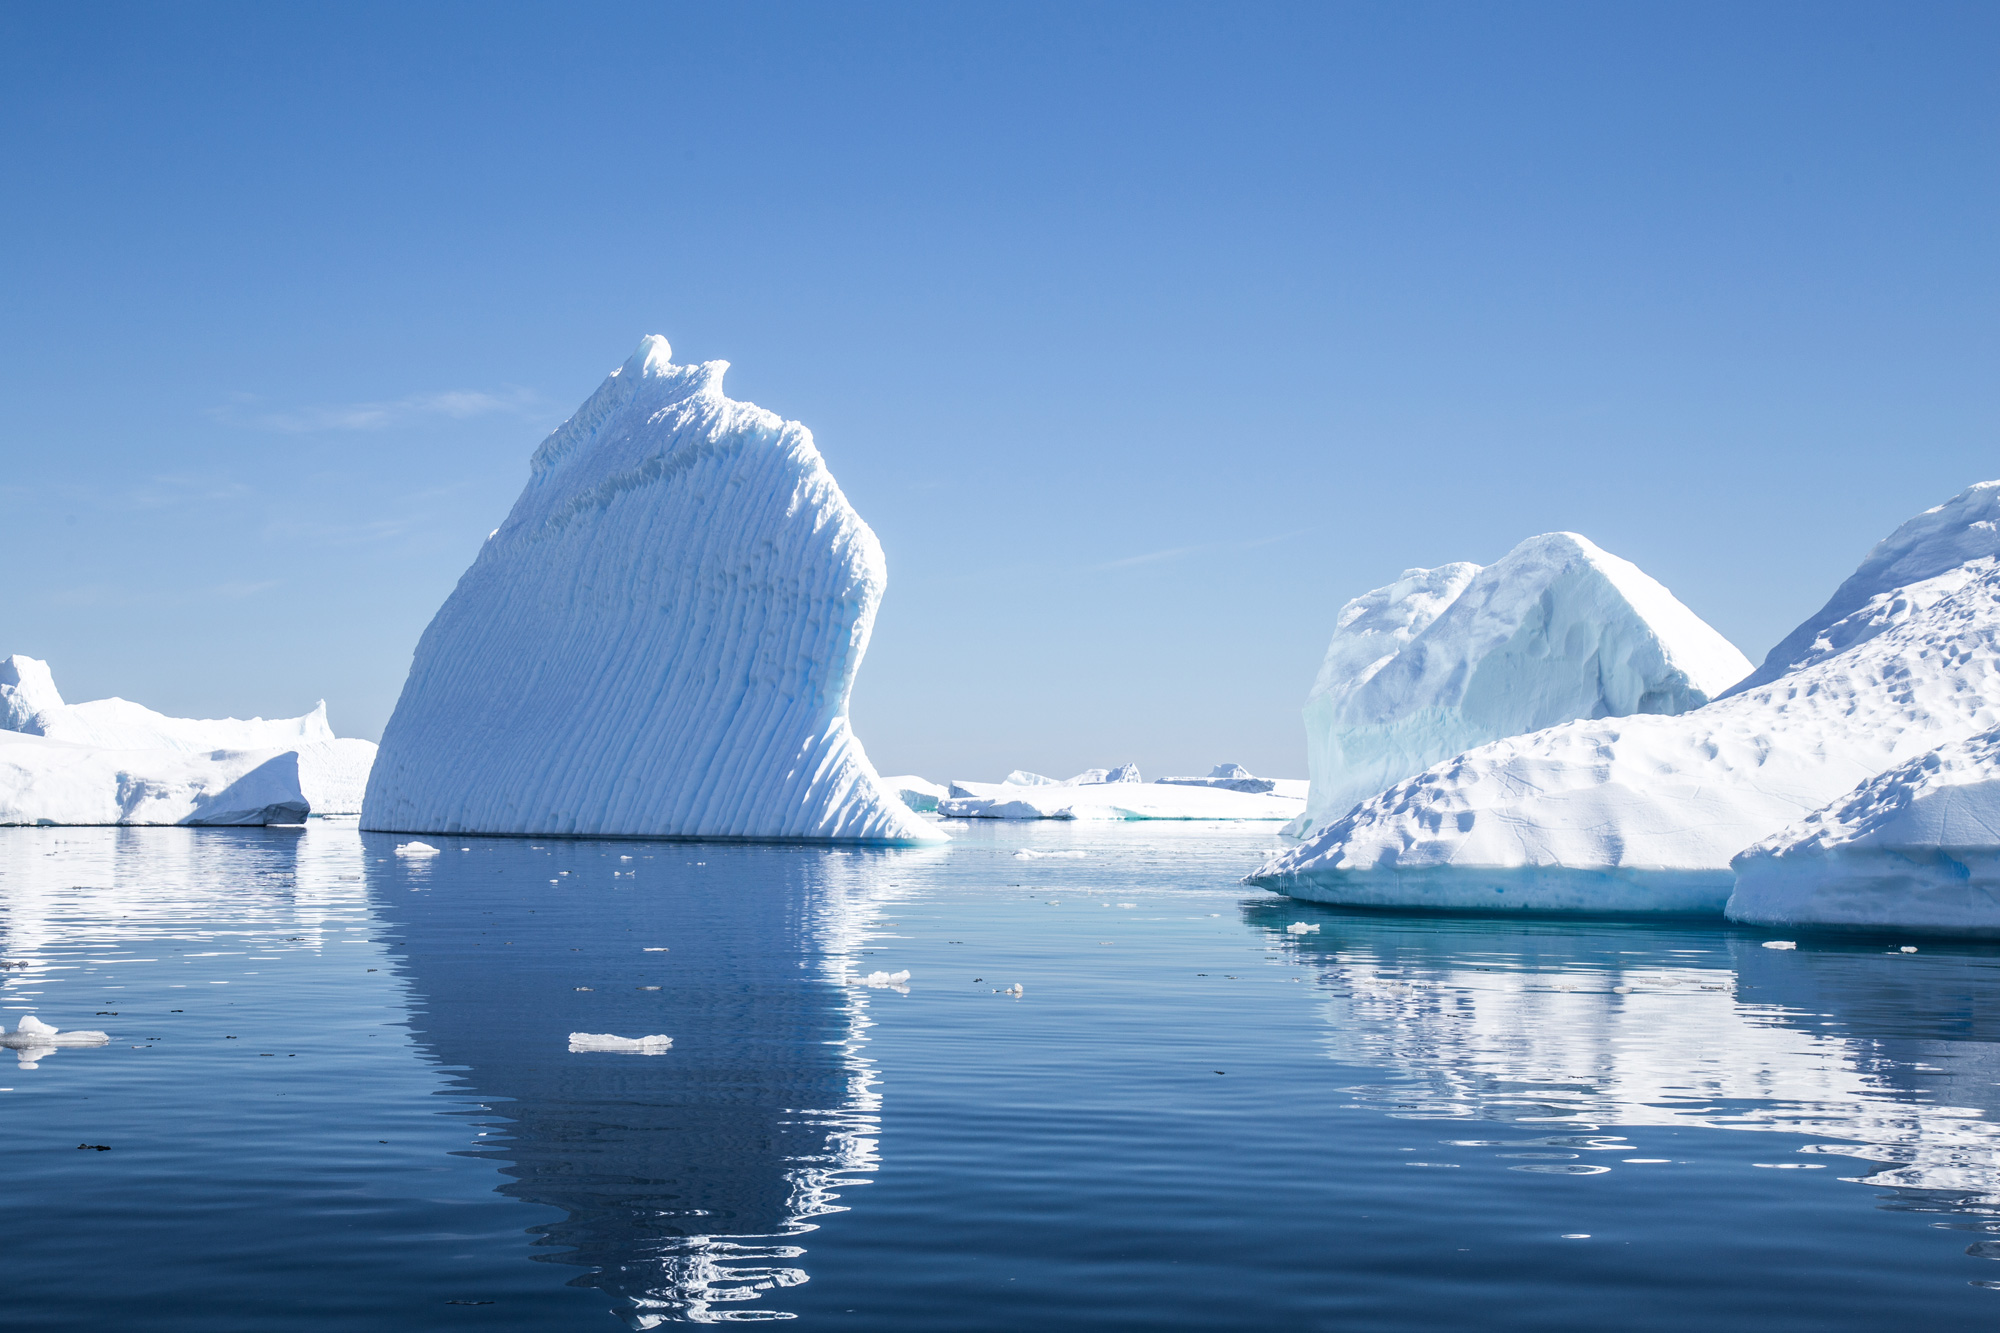 Antarctica with icebergs, home of Antarctic toothfish and other toothfish family types